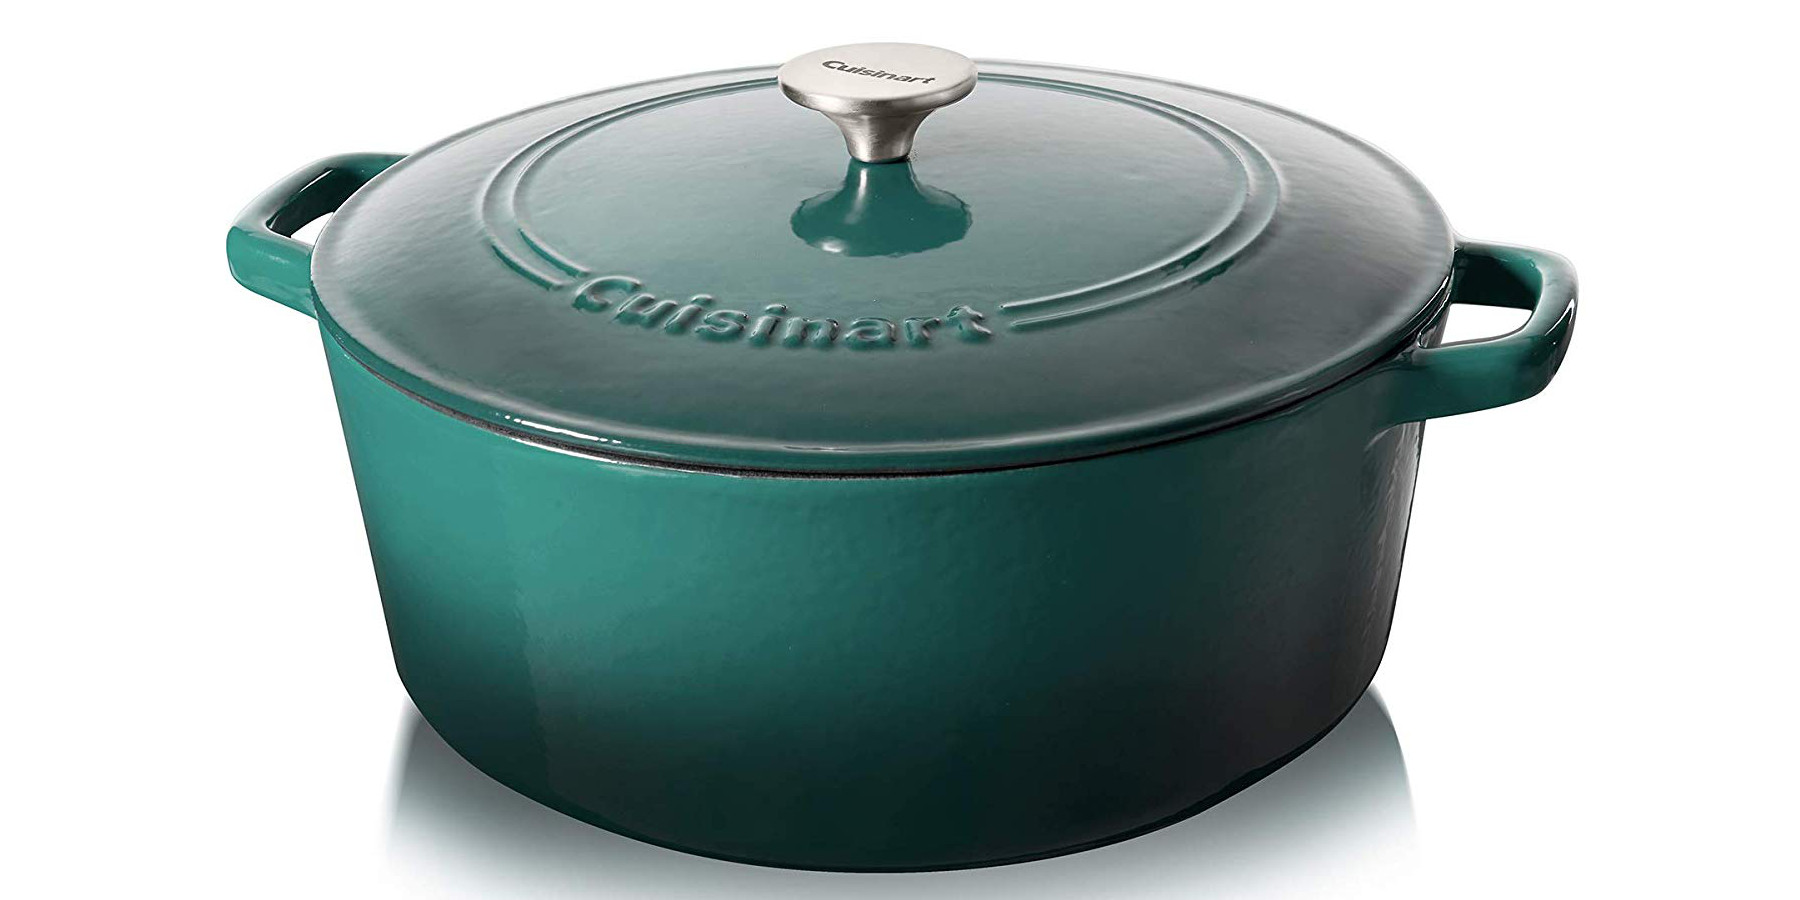 Cuisinart 7-Qt Enameled Cast Iron Round Covered Casserole Pot with Lid